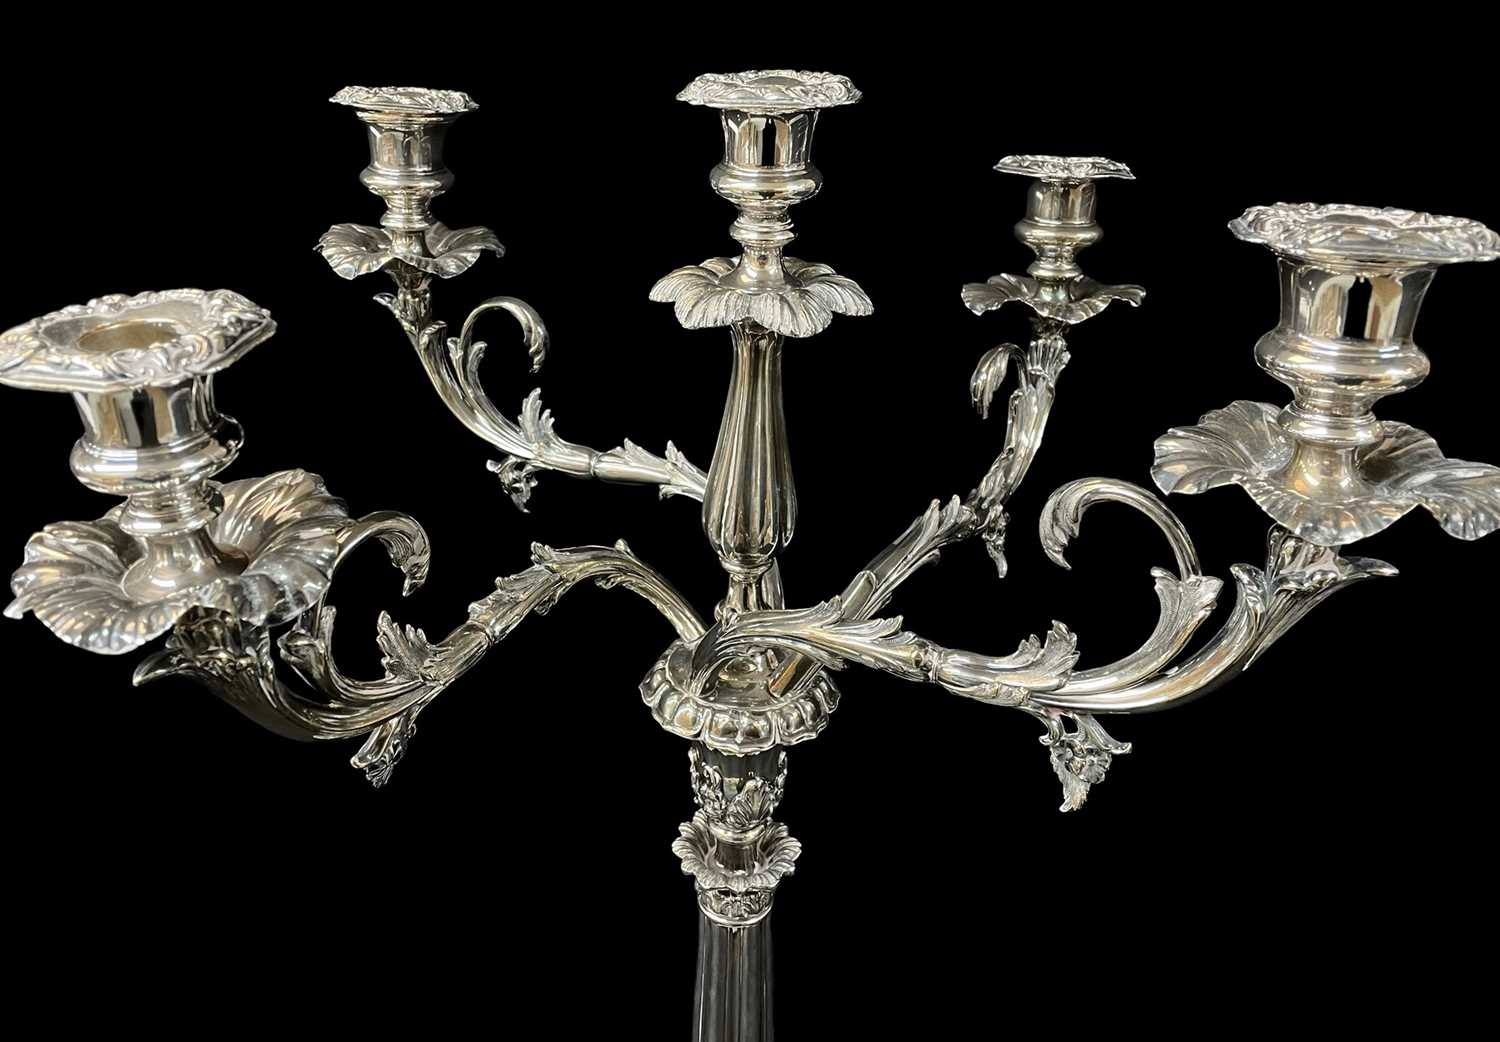 LARGE ELECTROPLATED FIVE-LIGHT CANDELABRUM, with 4 scrolled acanthus leaf arms supporting nozzles - Image 2 of 3